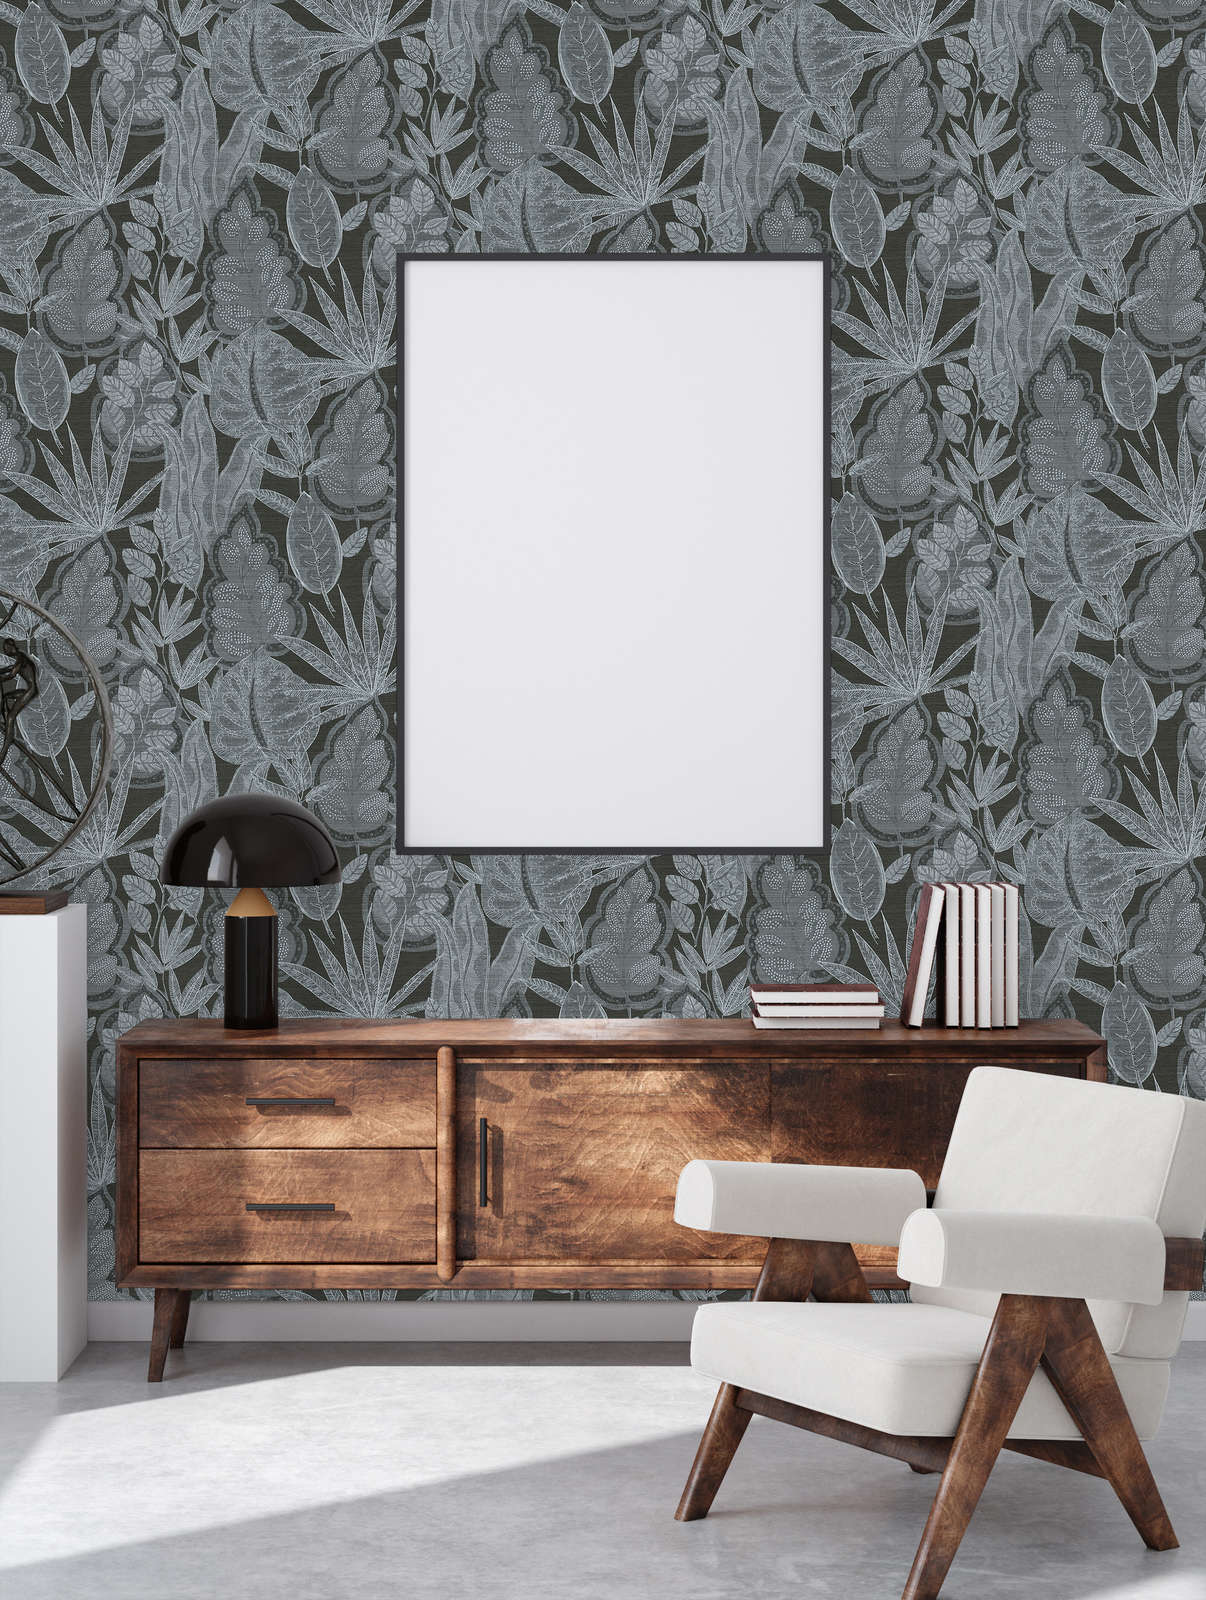             Floral wallpaper in graphic design with light structure, matt - black, grey, white
        